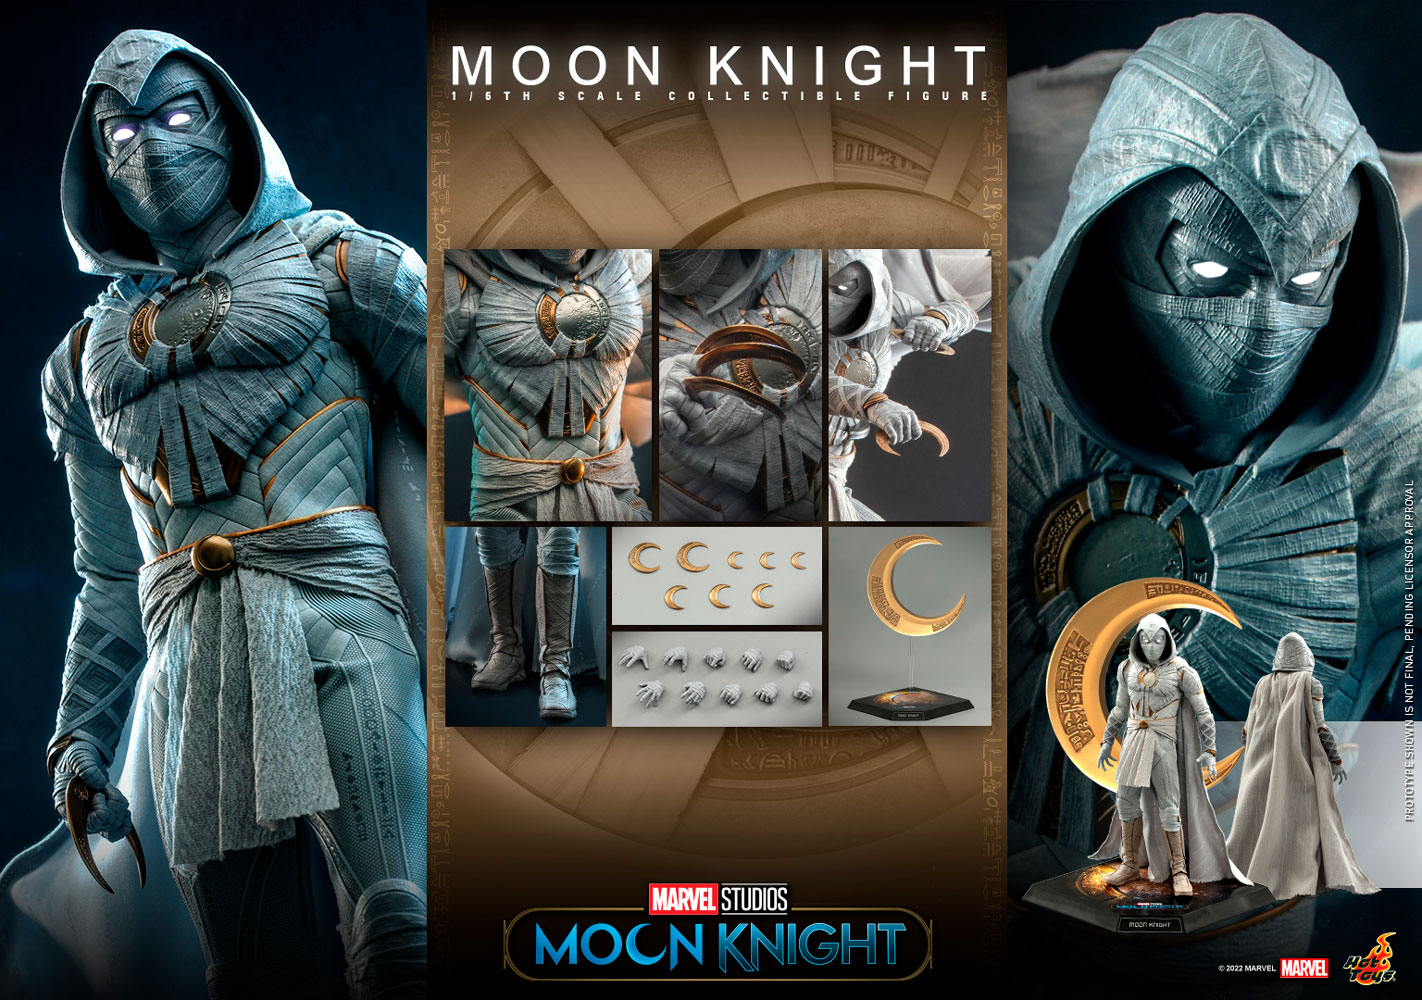 Moon Knight Sixth Scale Figure by Hot Toys